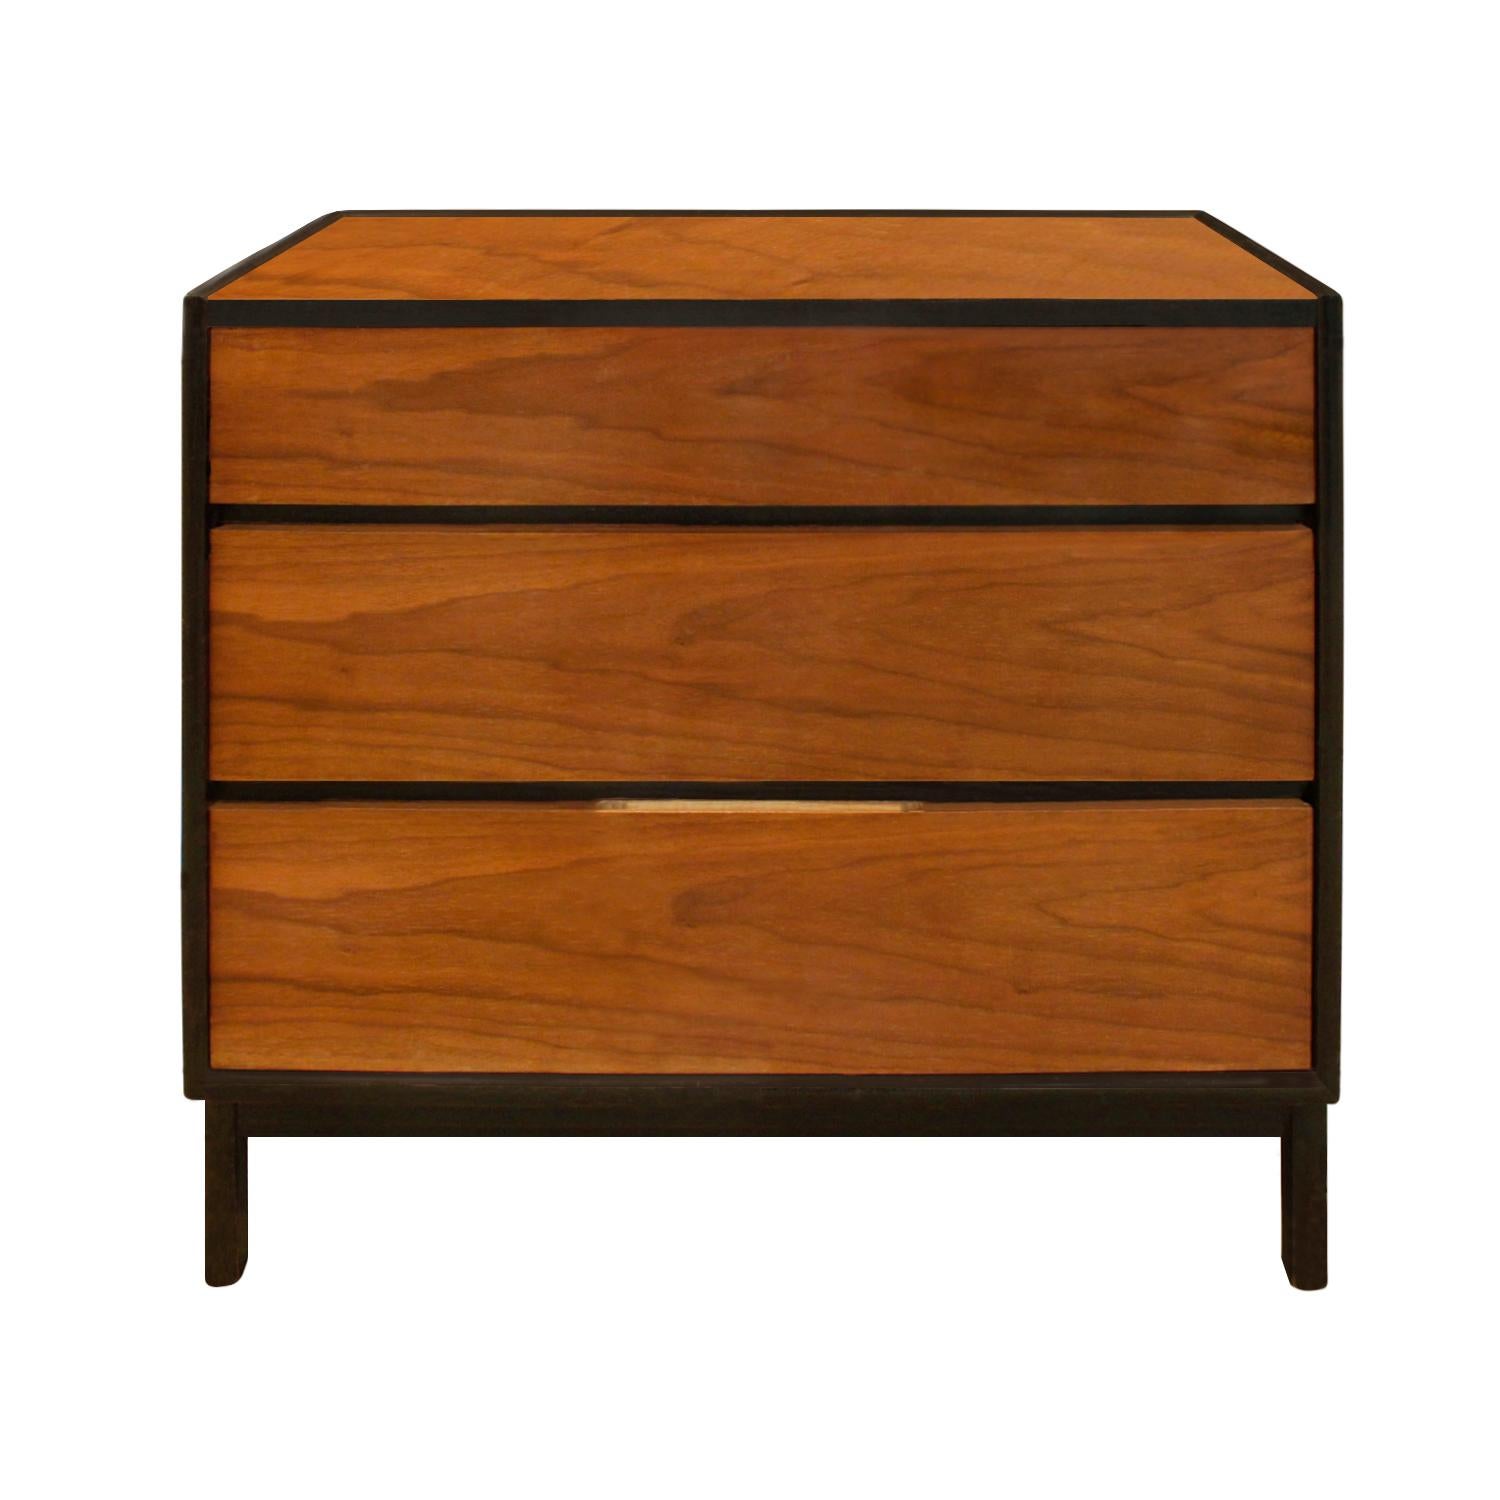 Mid-Century Modern Edward Wormley Pair of Bedside Tables/Chests in Teak and Mahogany 1950s ‘Signed’